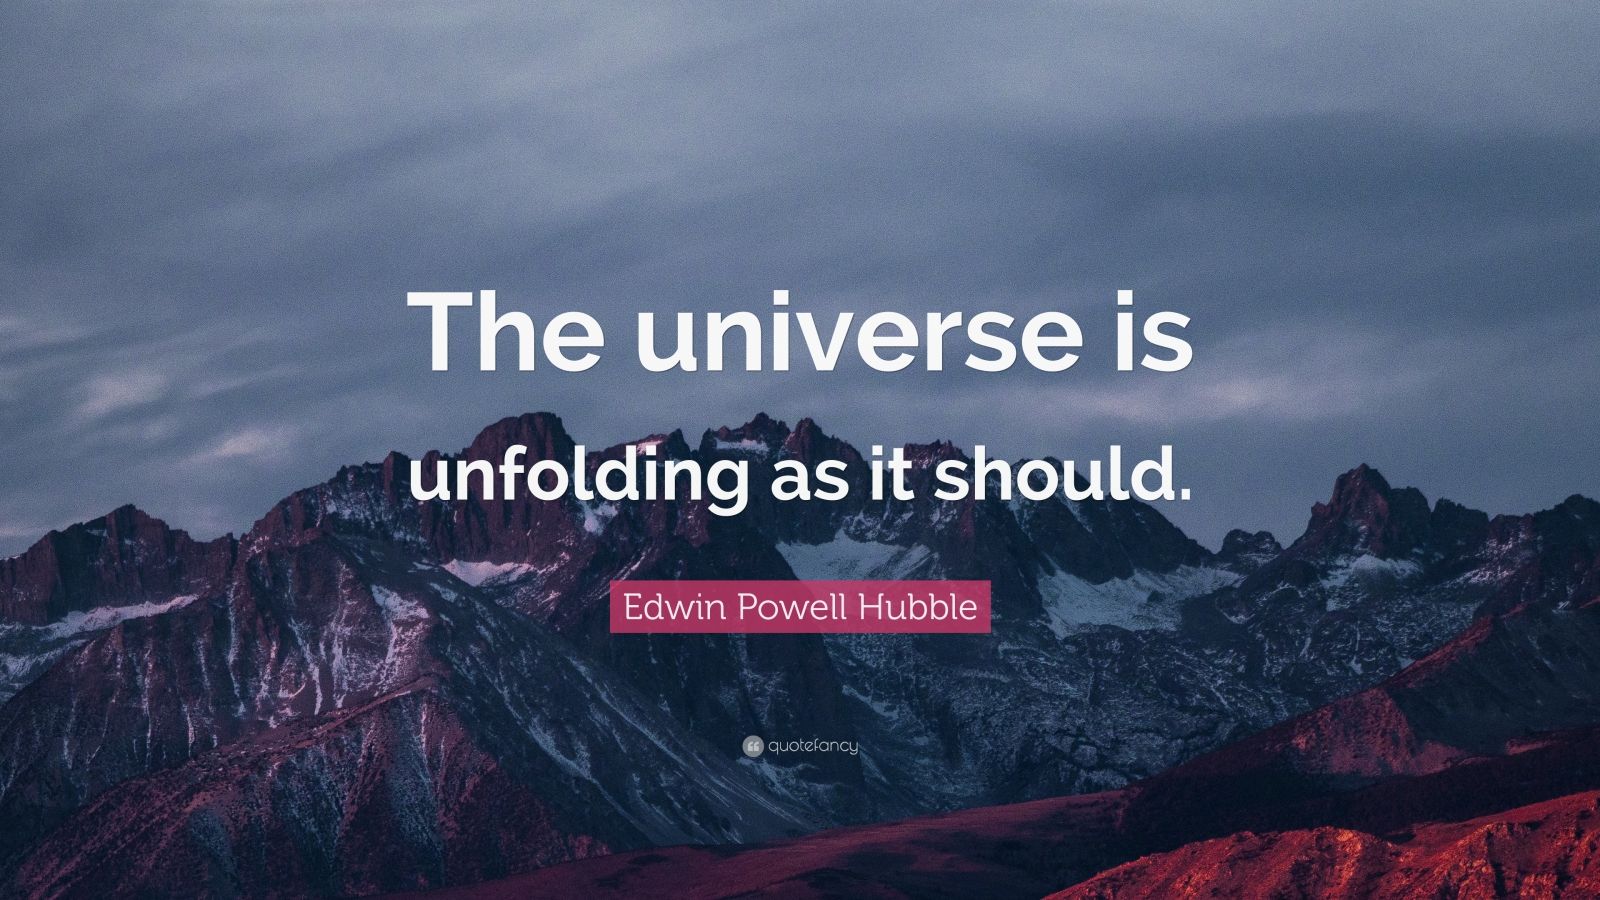 Edwin Powell Hubble Quote: “The universe is unfolding as it should ...